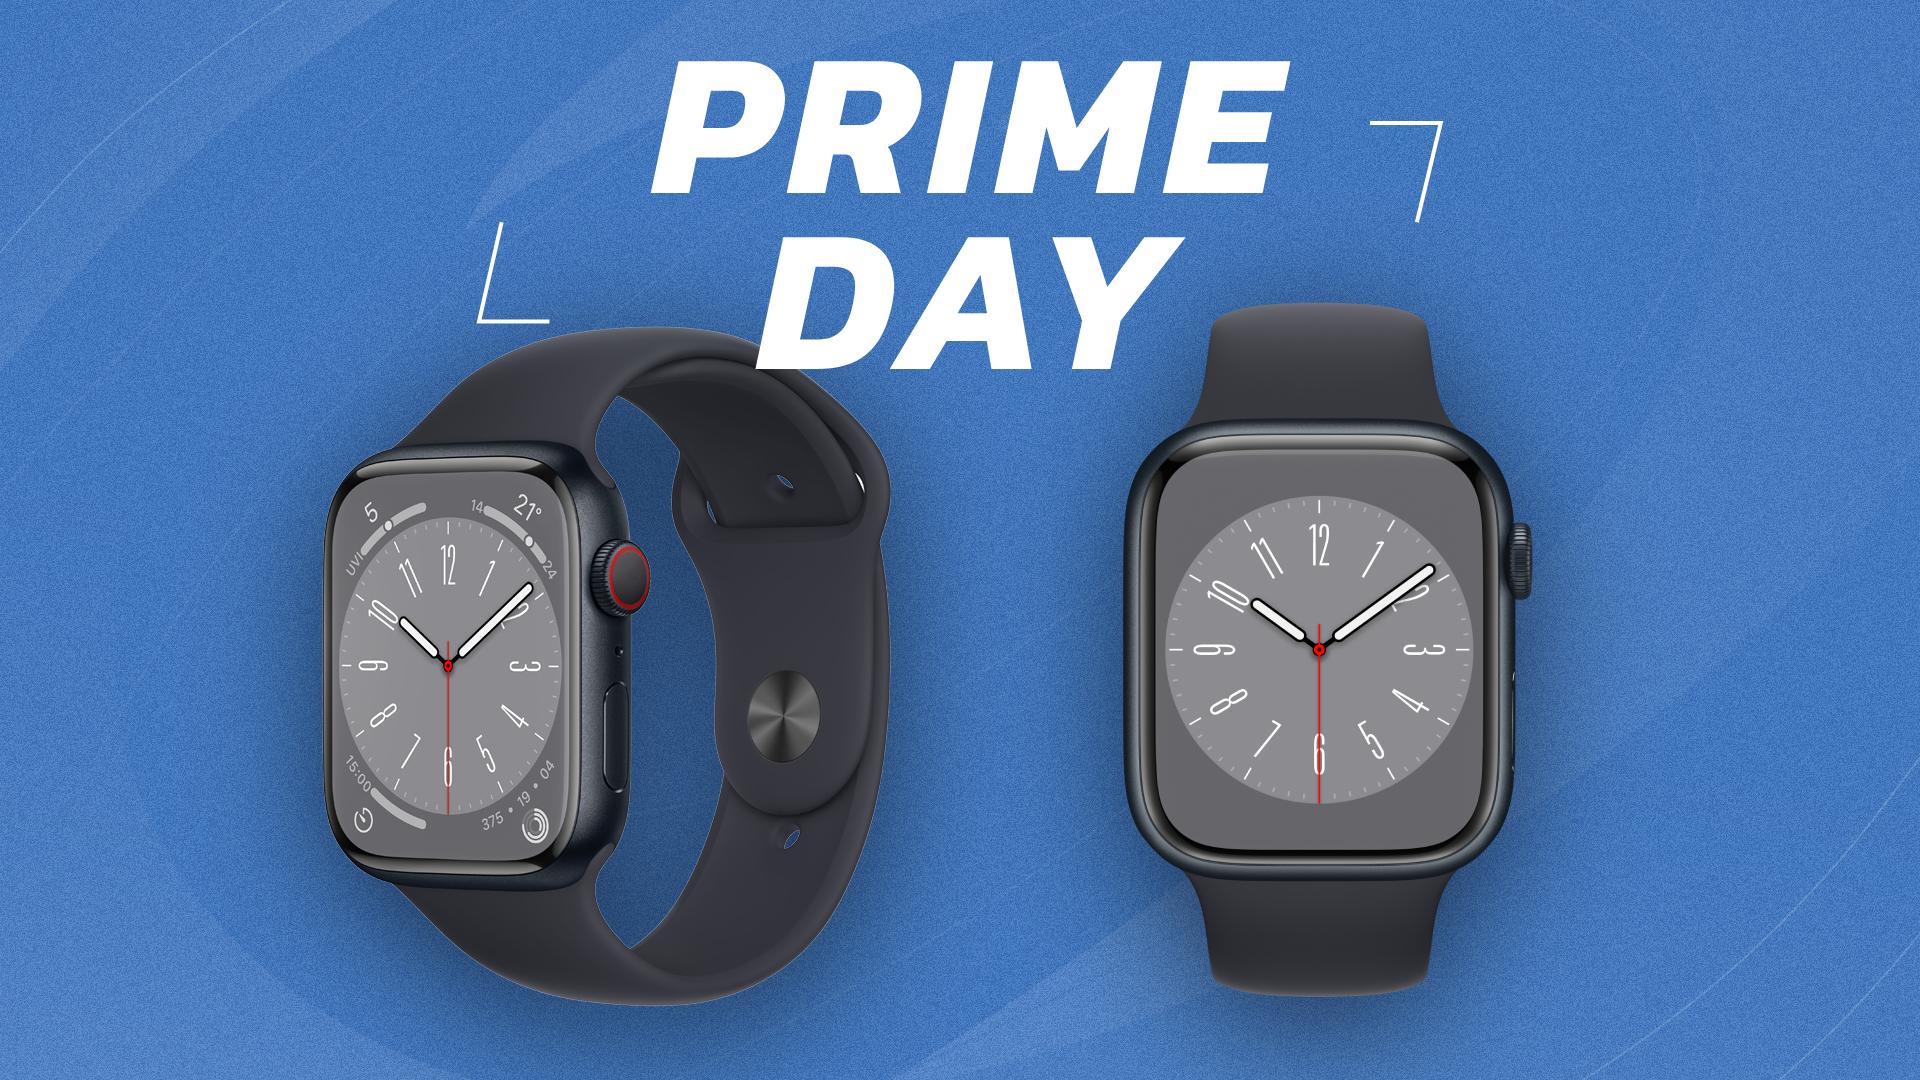 Apple watches on a blue background with Prime Day lettering